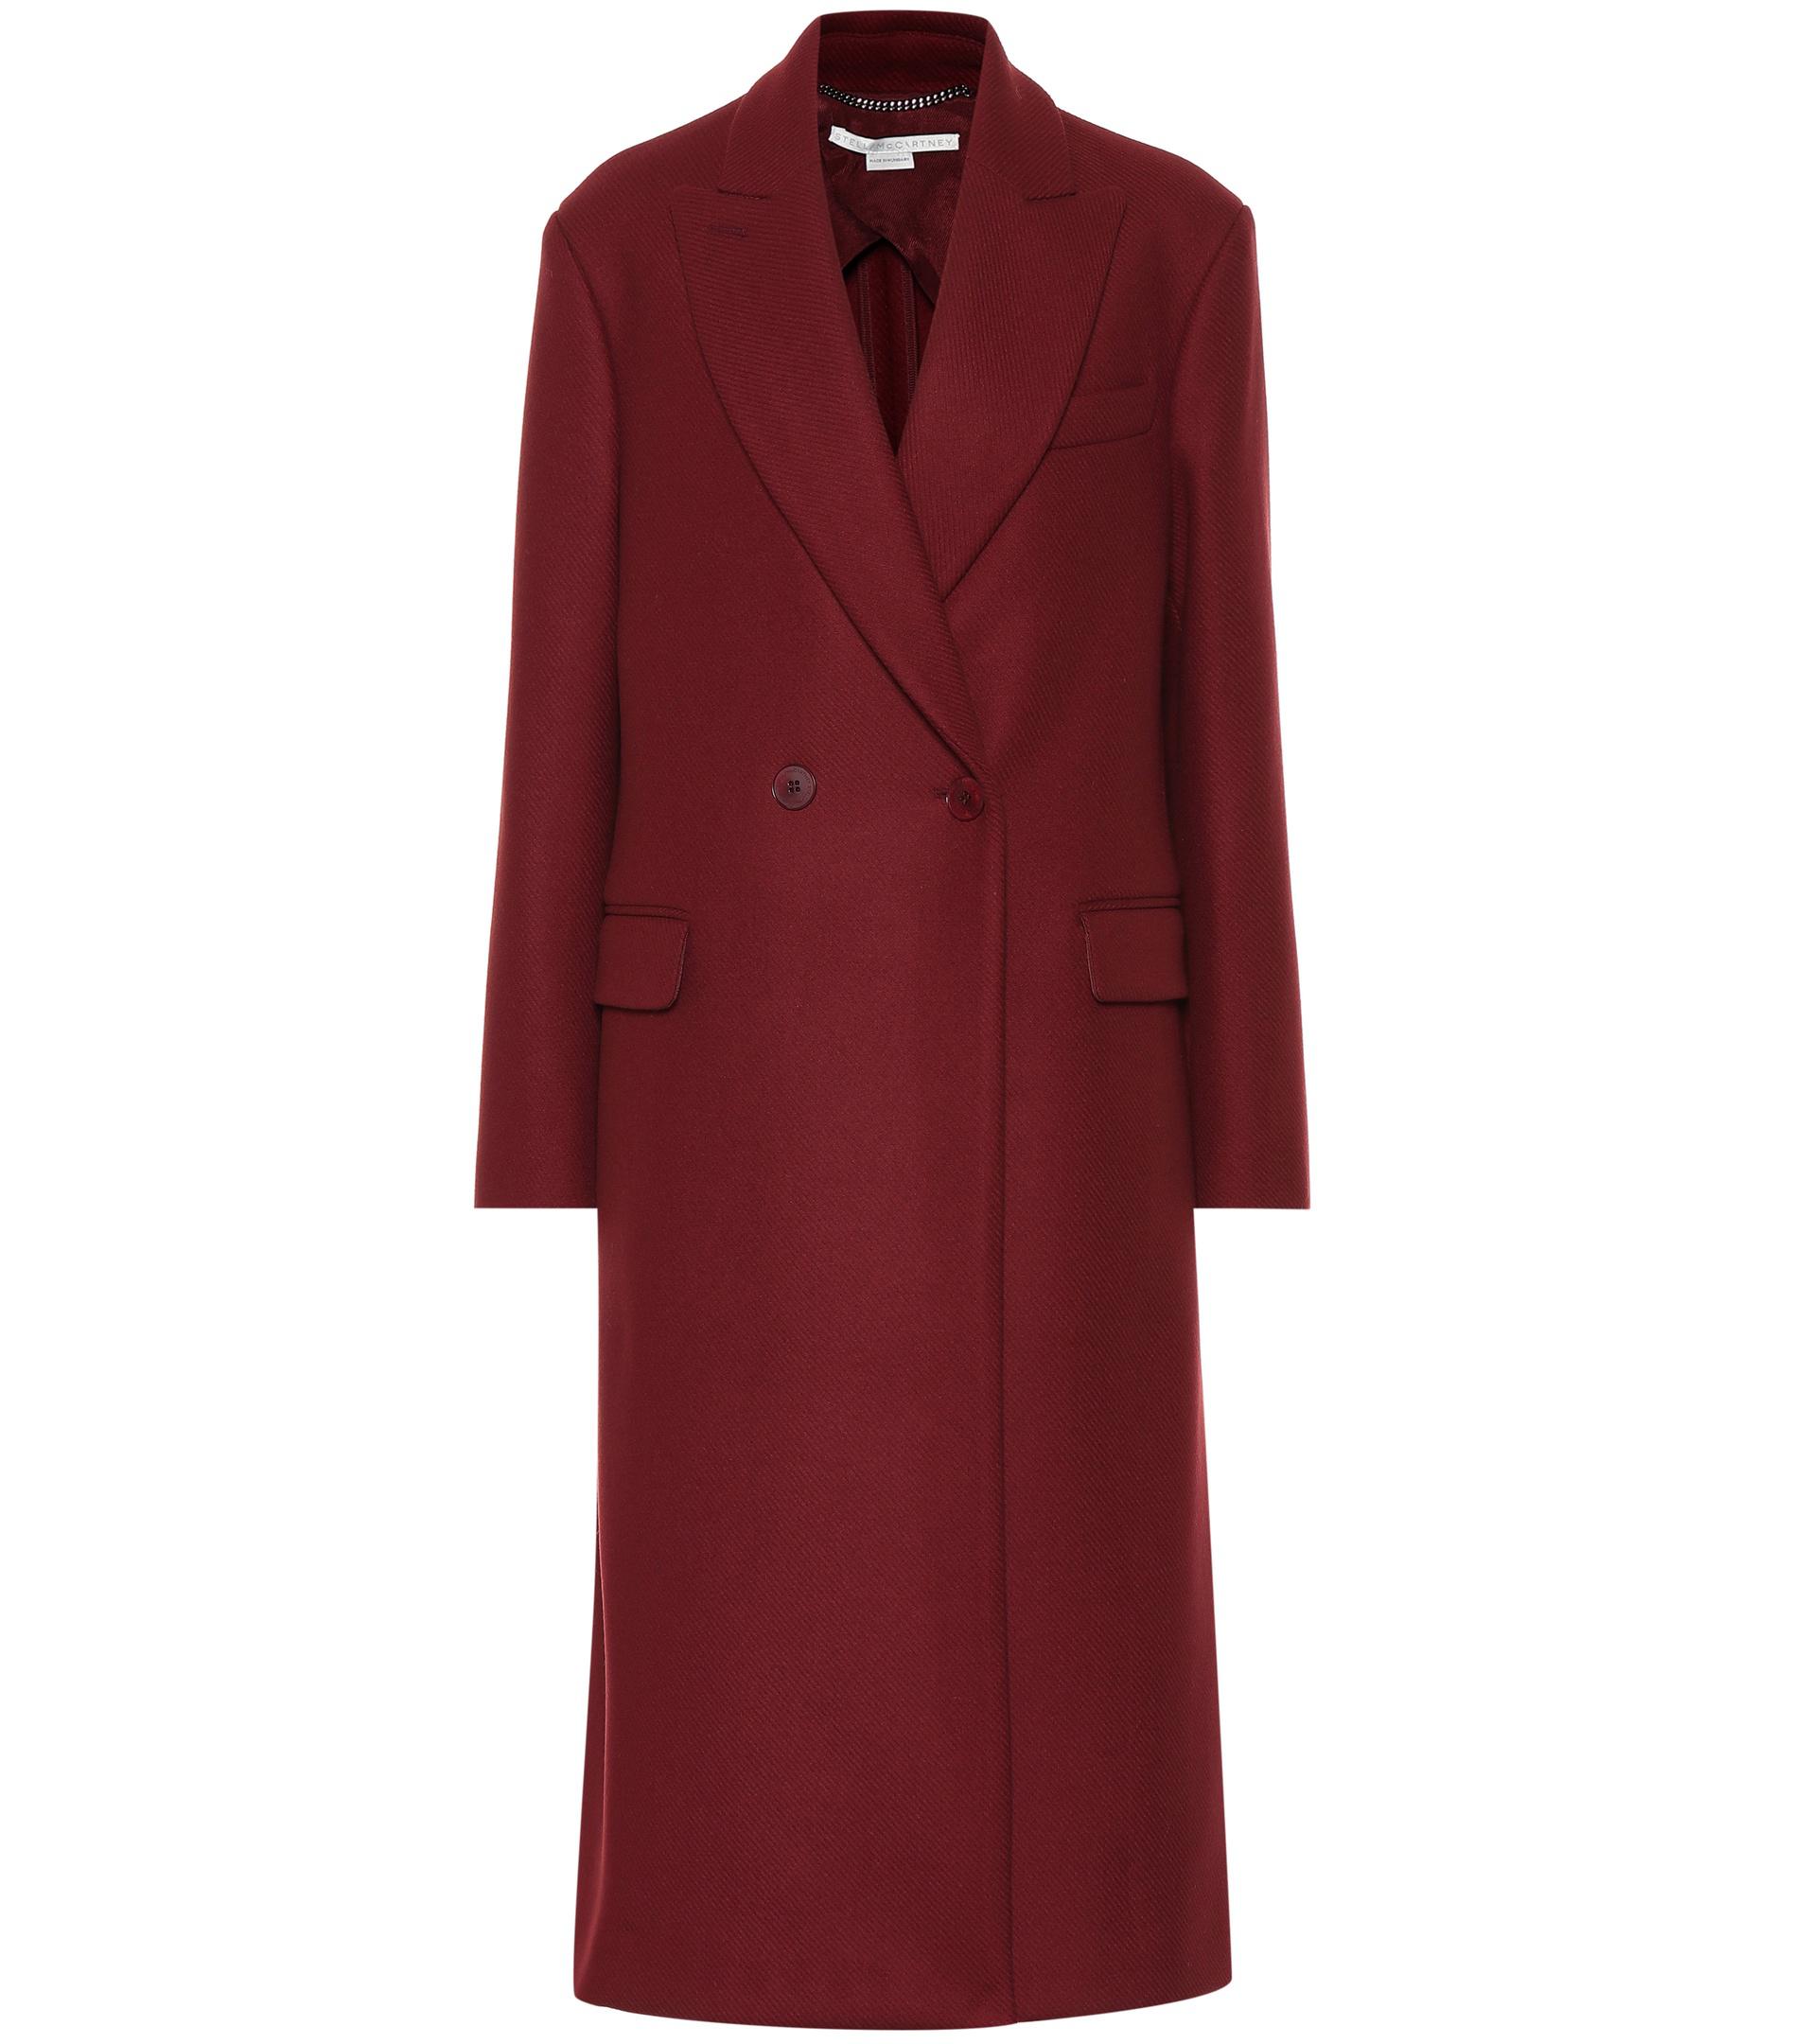 Stella McCartney Double-breasted Wool Coat in Red - Lyst